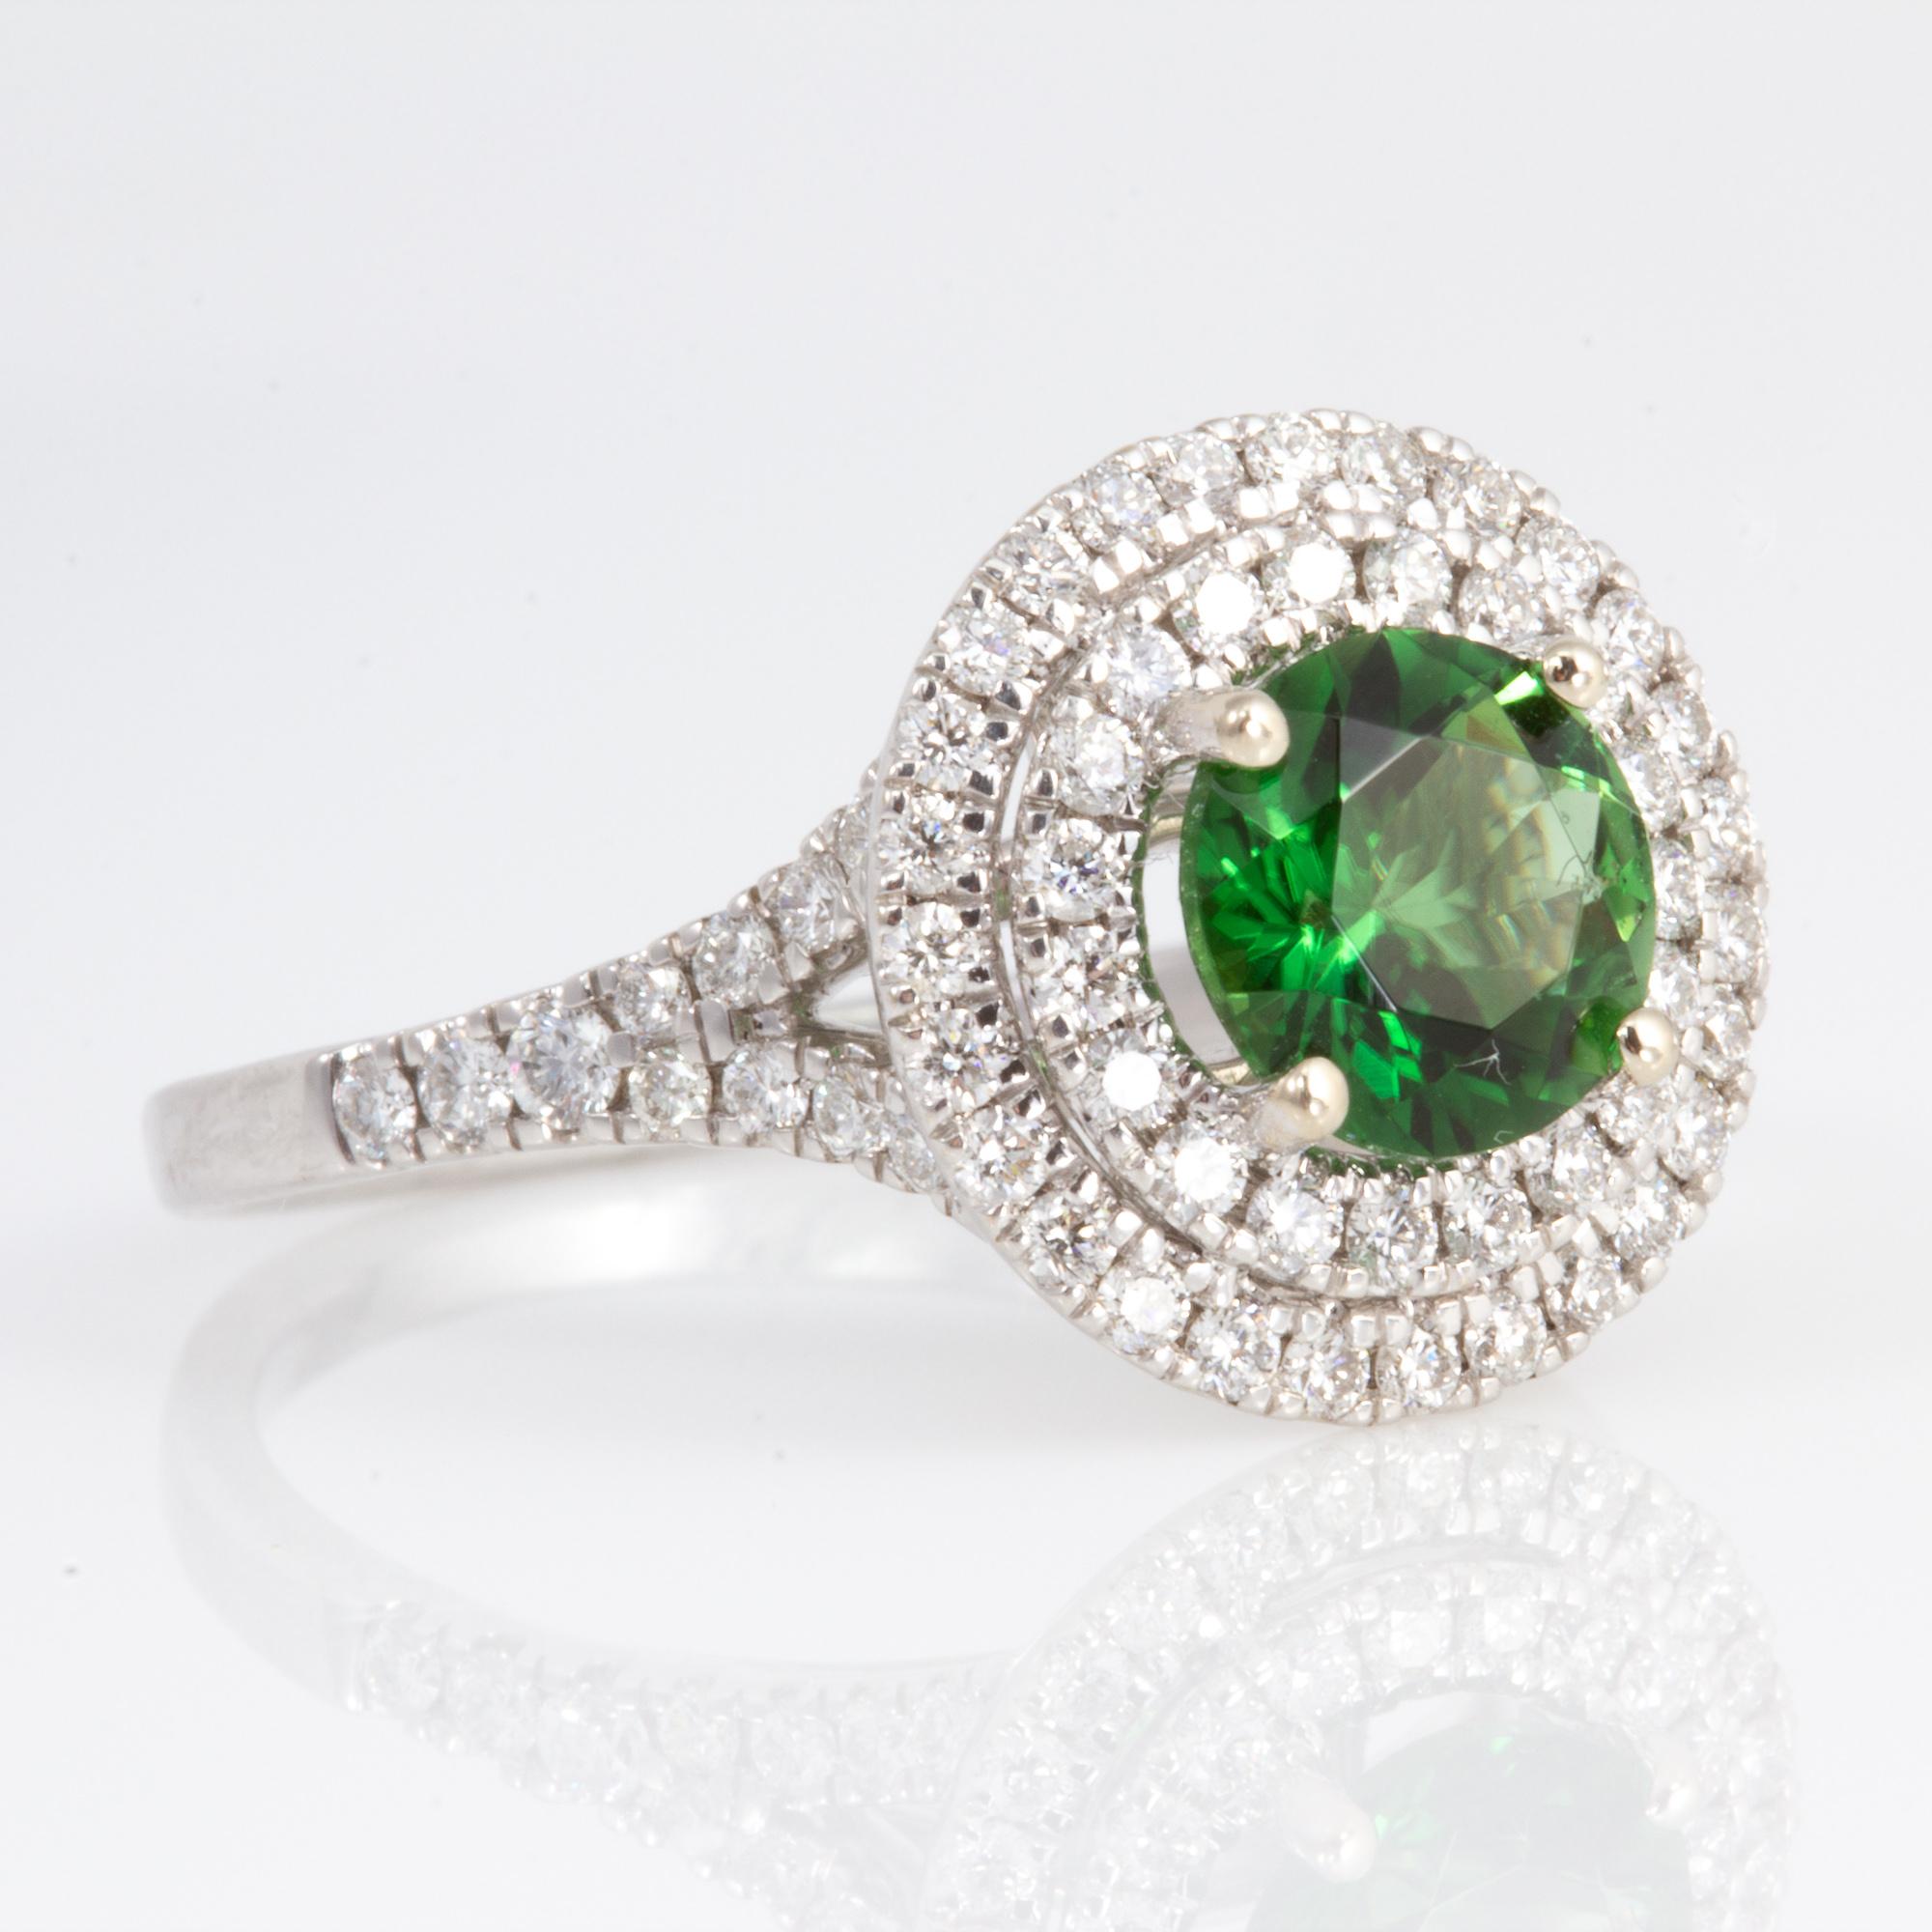 Exceptionally Well Cut 1.26 Carat Chrome Tourmaline and Diamond Ring For Sale 8